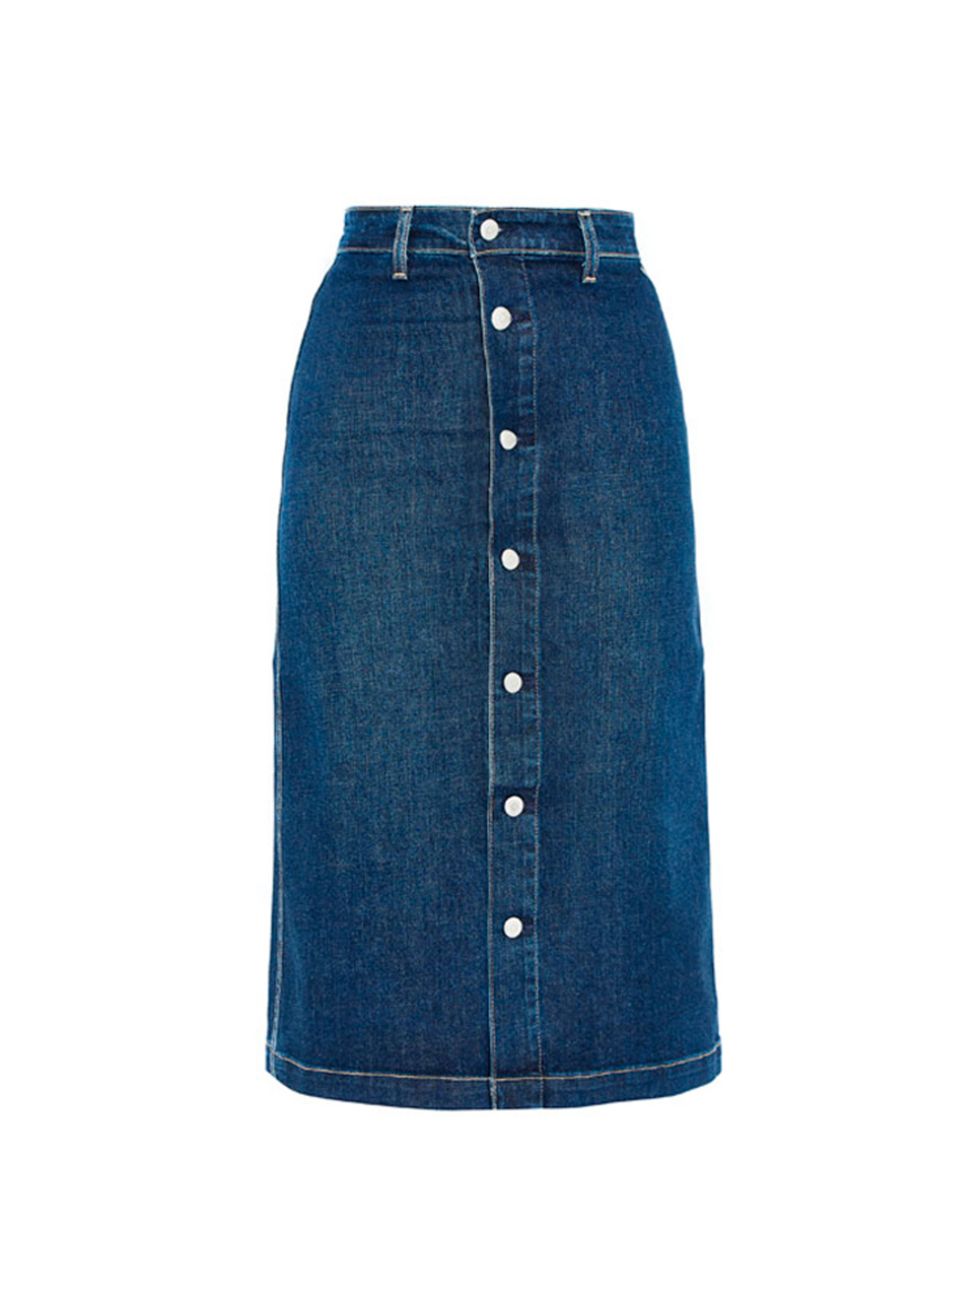 <p>Alexa Chung for AG Jeans Skirt, £250 at <a href="http://www.liberty.co.uk/fcp/product/Liberty//Navy-Button-Down-Denim-Midi-Skirt/126138" target="_blank">liberty.co.uk </a></p>